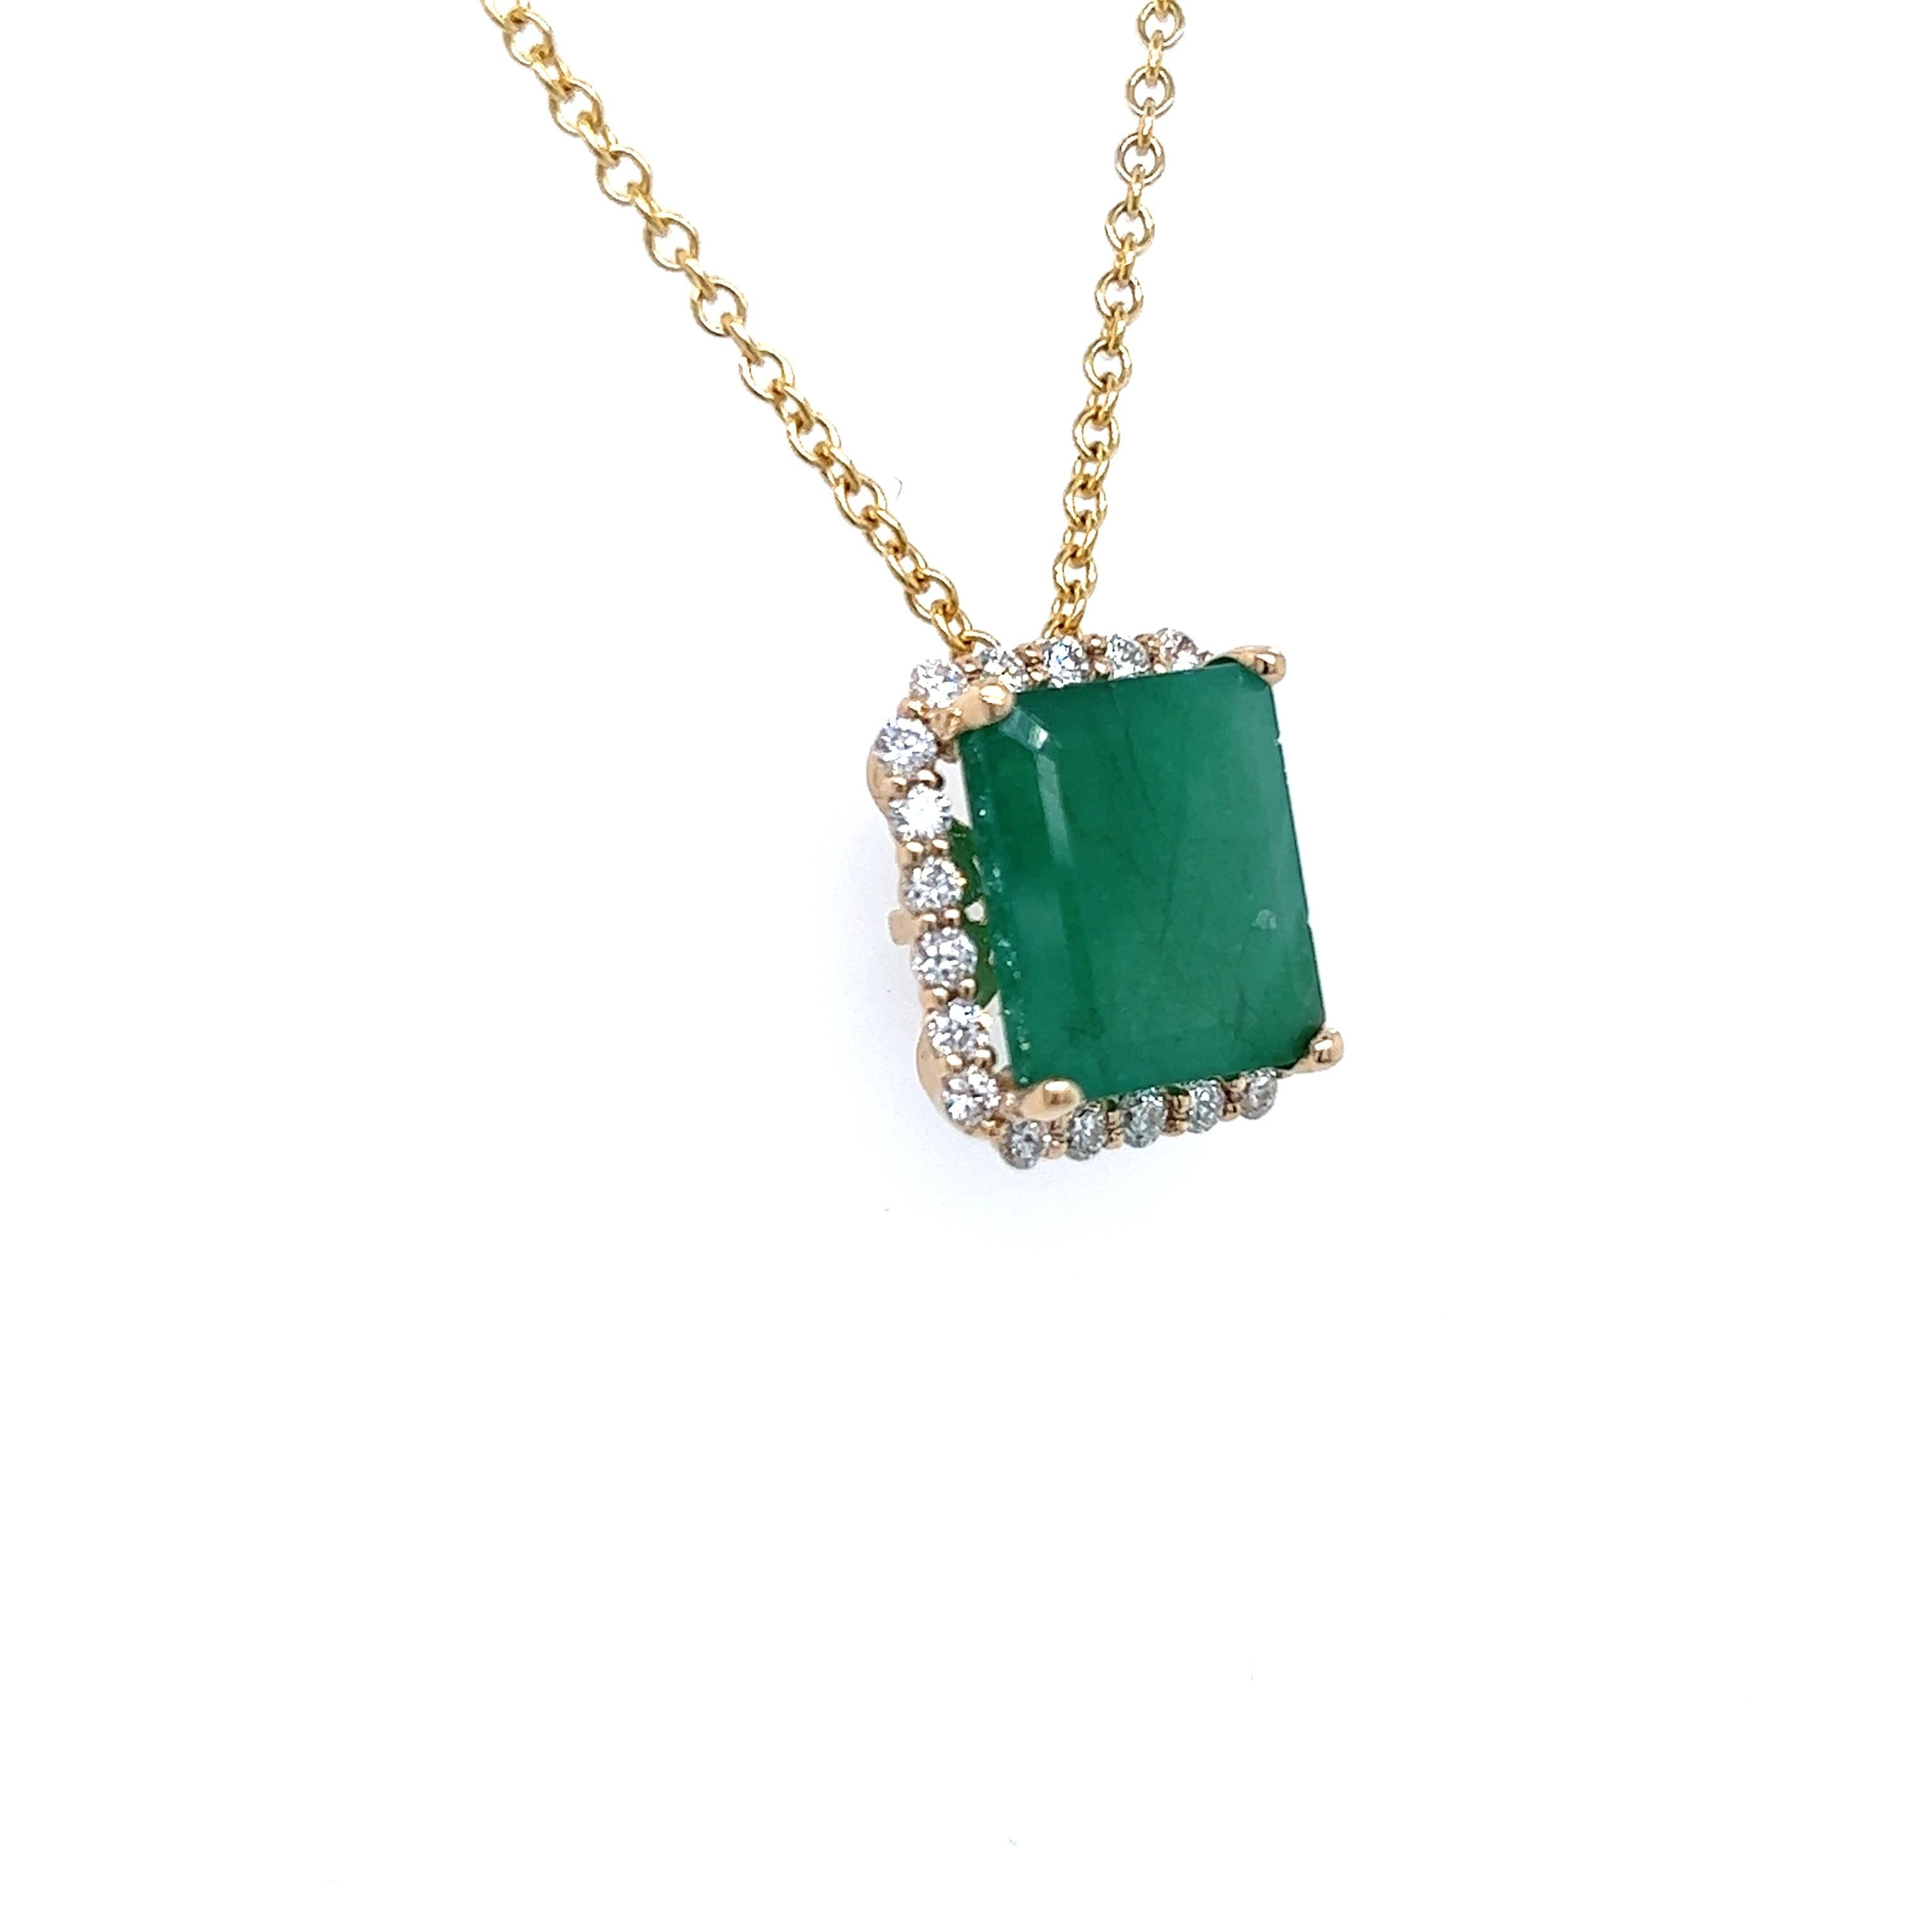 Emerald Cut Natural Emerald Diamond Pendant Necklace 14k Yellow Gold 5.05 TCW Certified For Sale